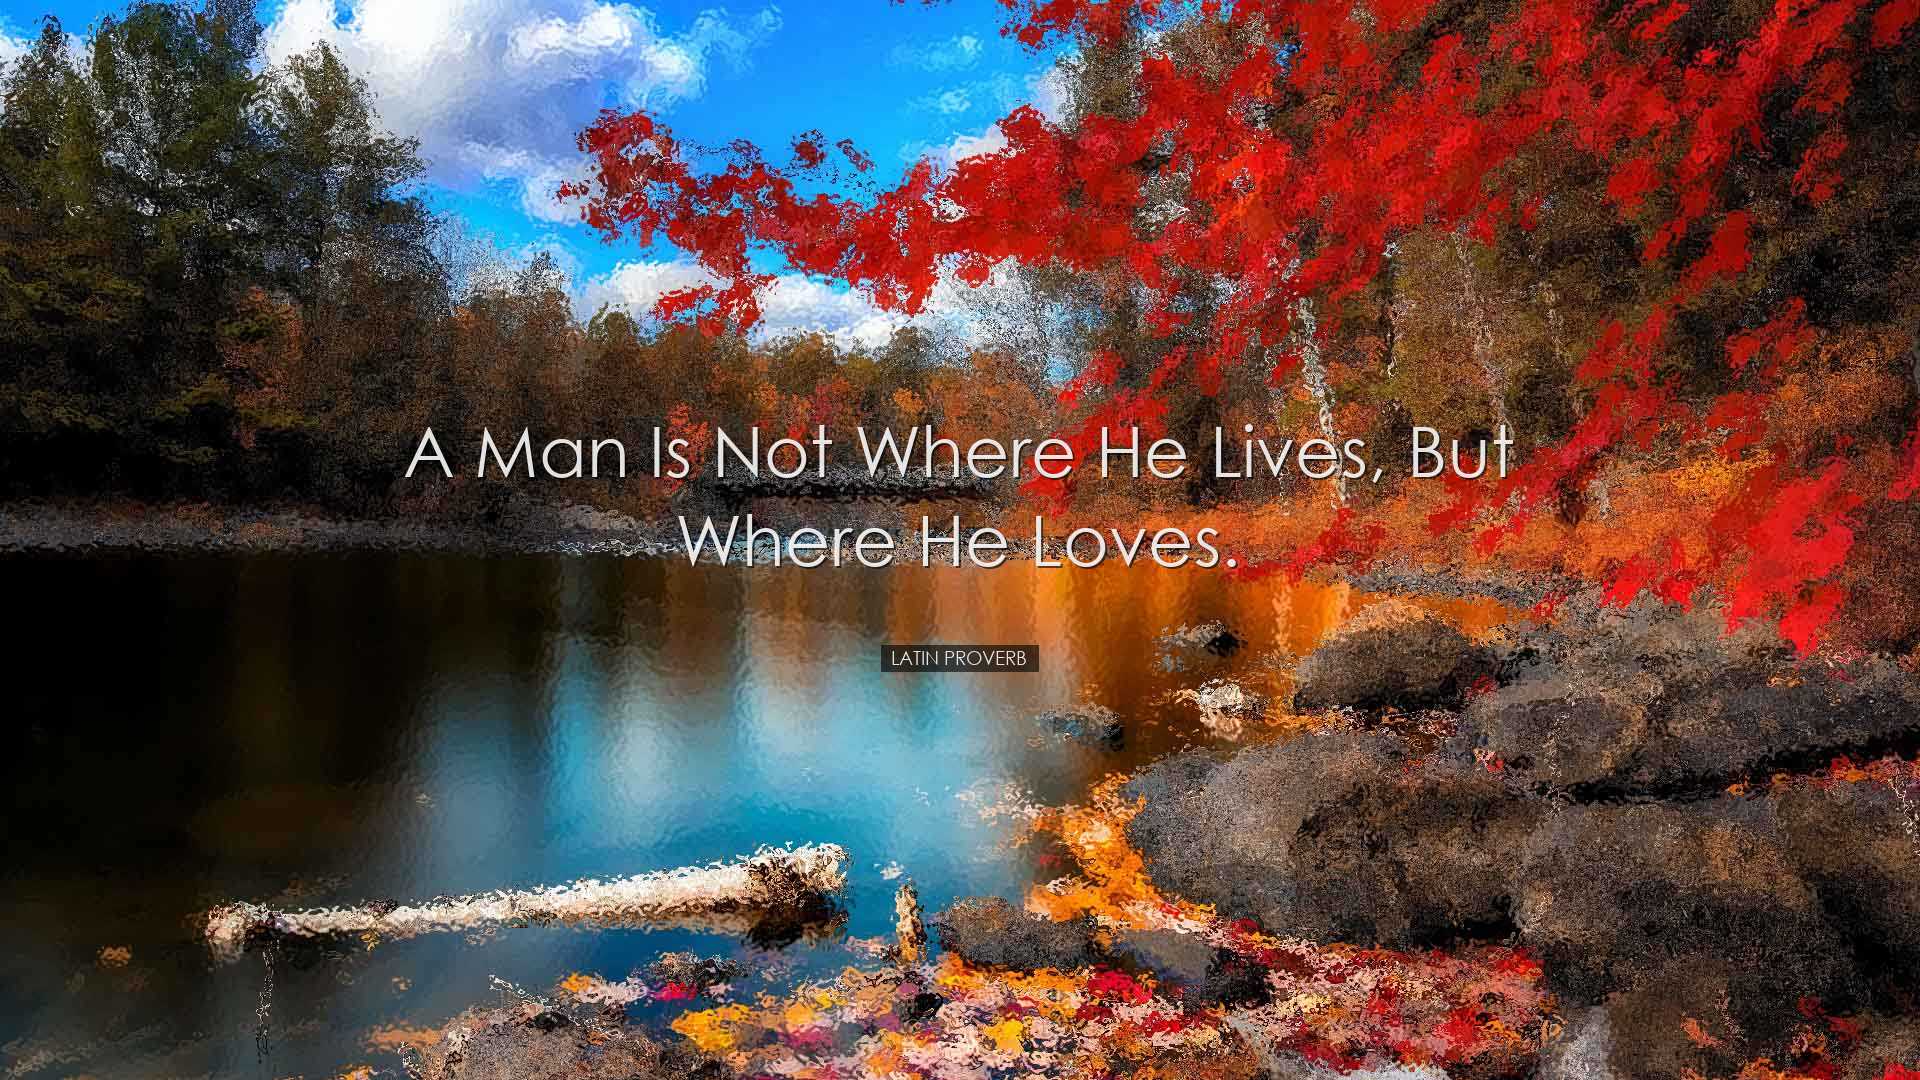 A man is not where he lives, but where he loves. - Latin Proverb